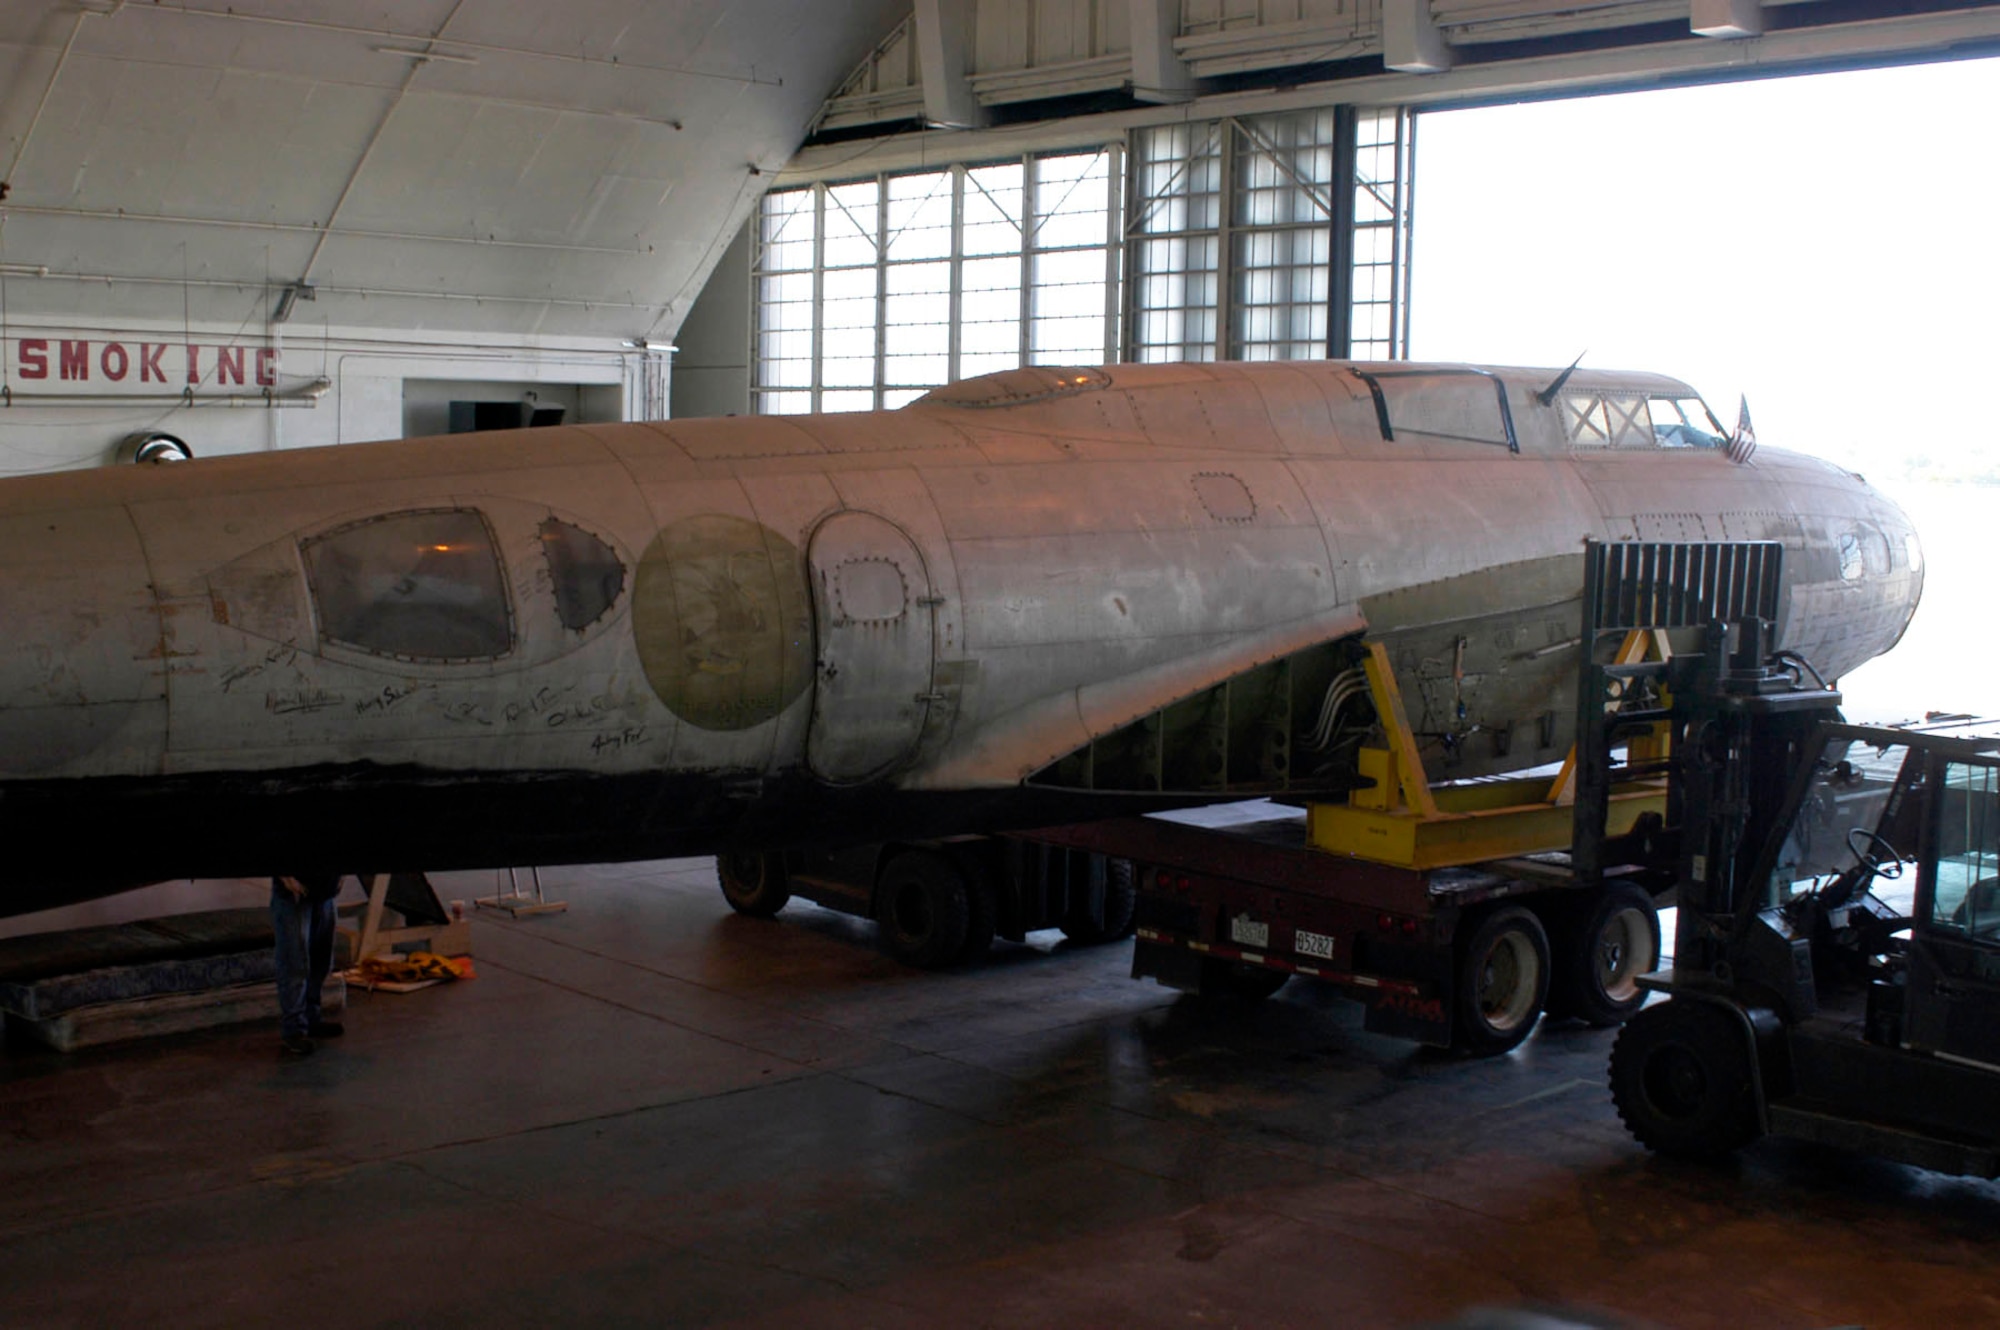 DAYTON, Ohio -- Restoration crews work together to unload the fuselage of the B-17D "The Swoose" that recently arrived at the National Museum of the U.S. Air Force from the National Air and Space Museum. (U.S. Air Force photo)